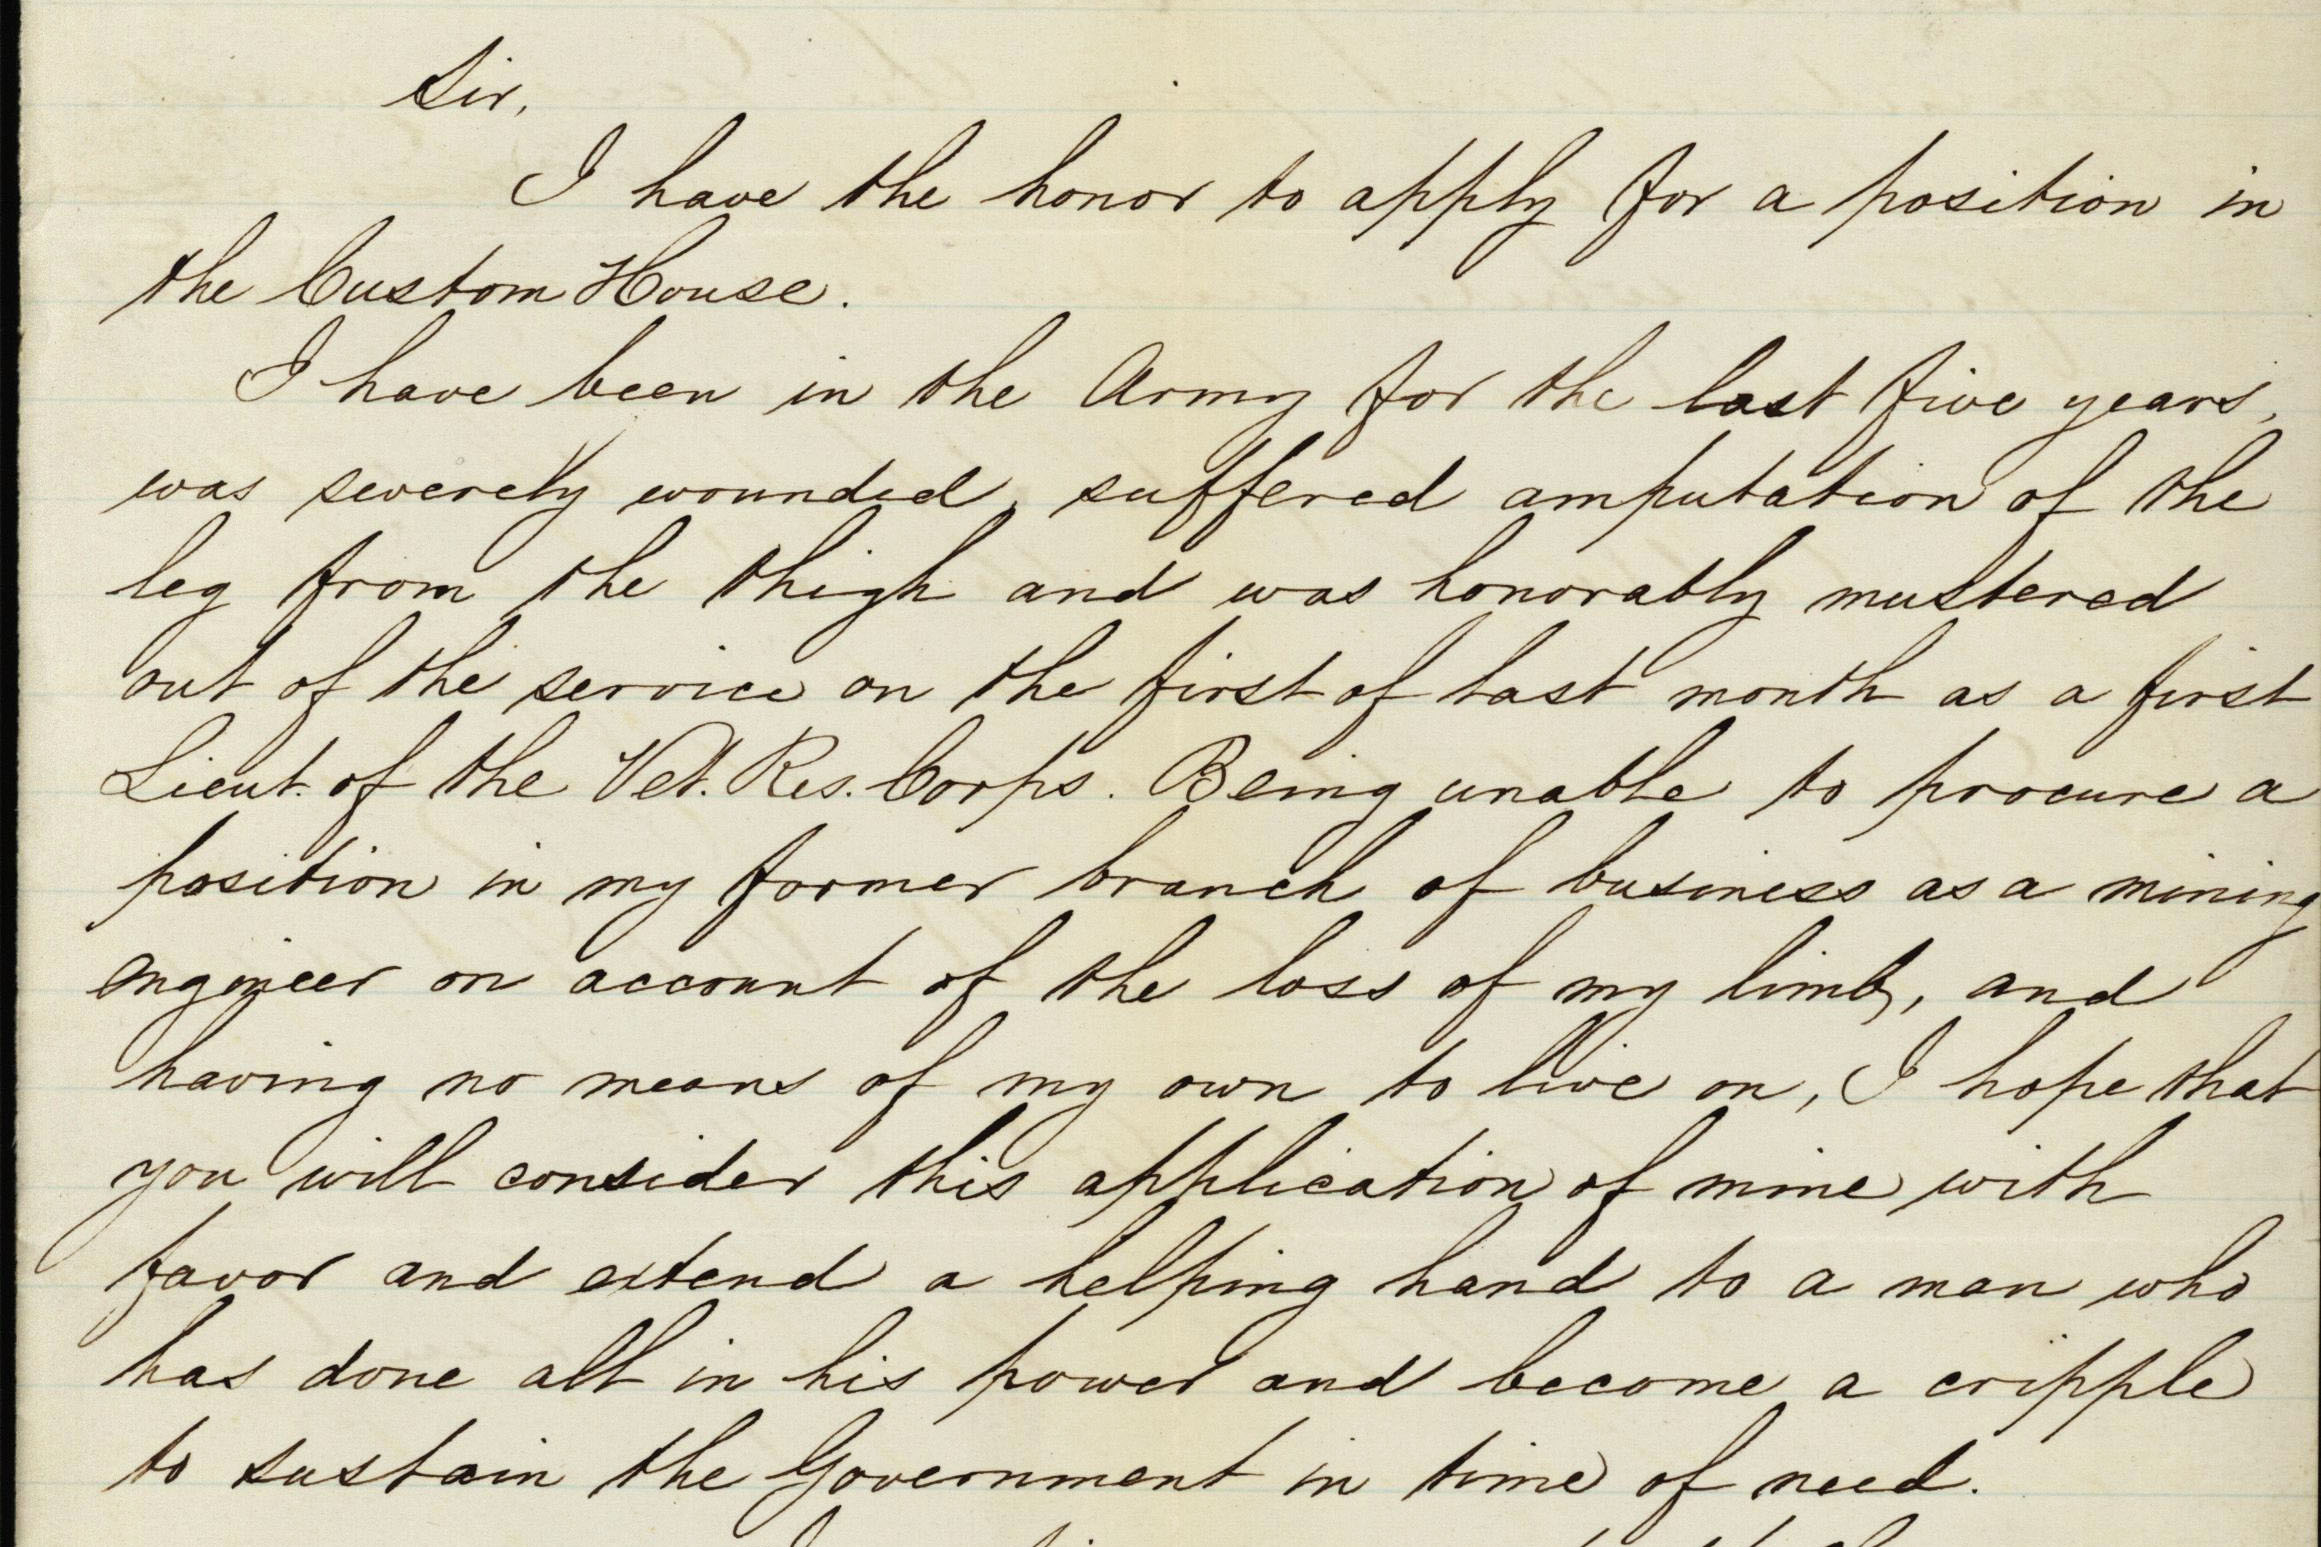 Letter to the Collector of Customs from Francis Wernick, a Civil War veteran, detail, October 1, 1866